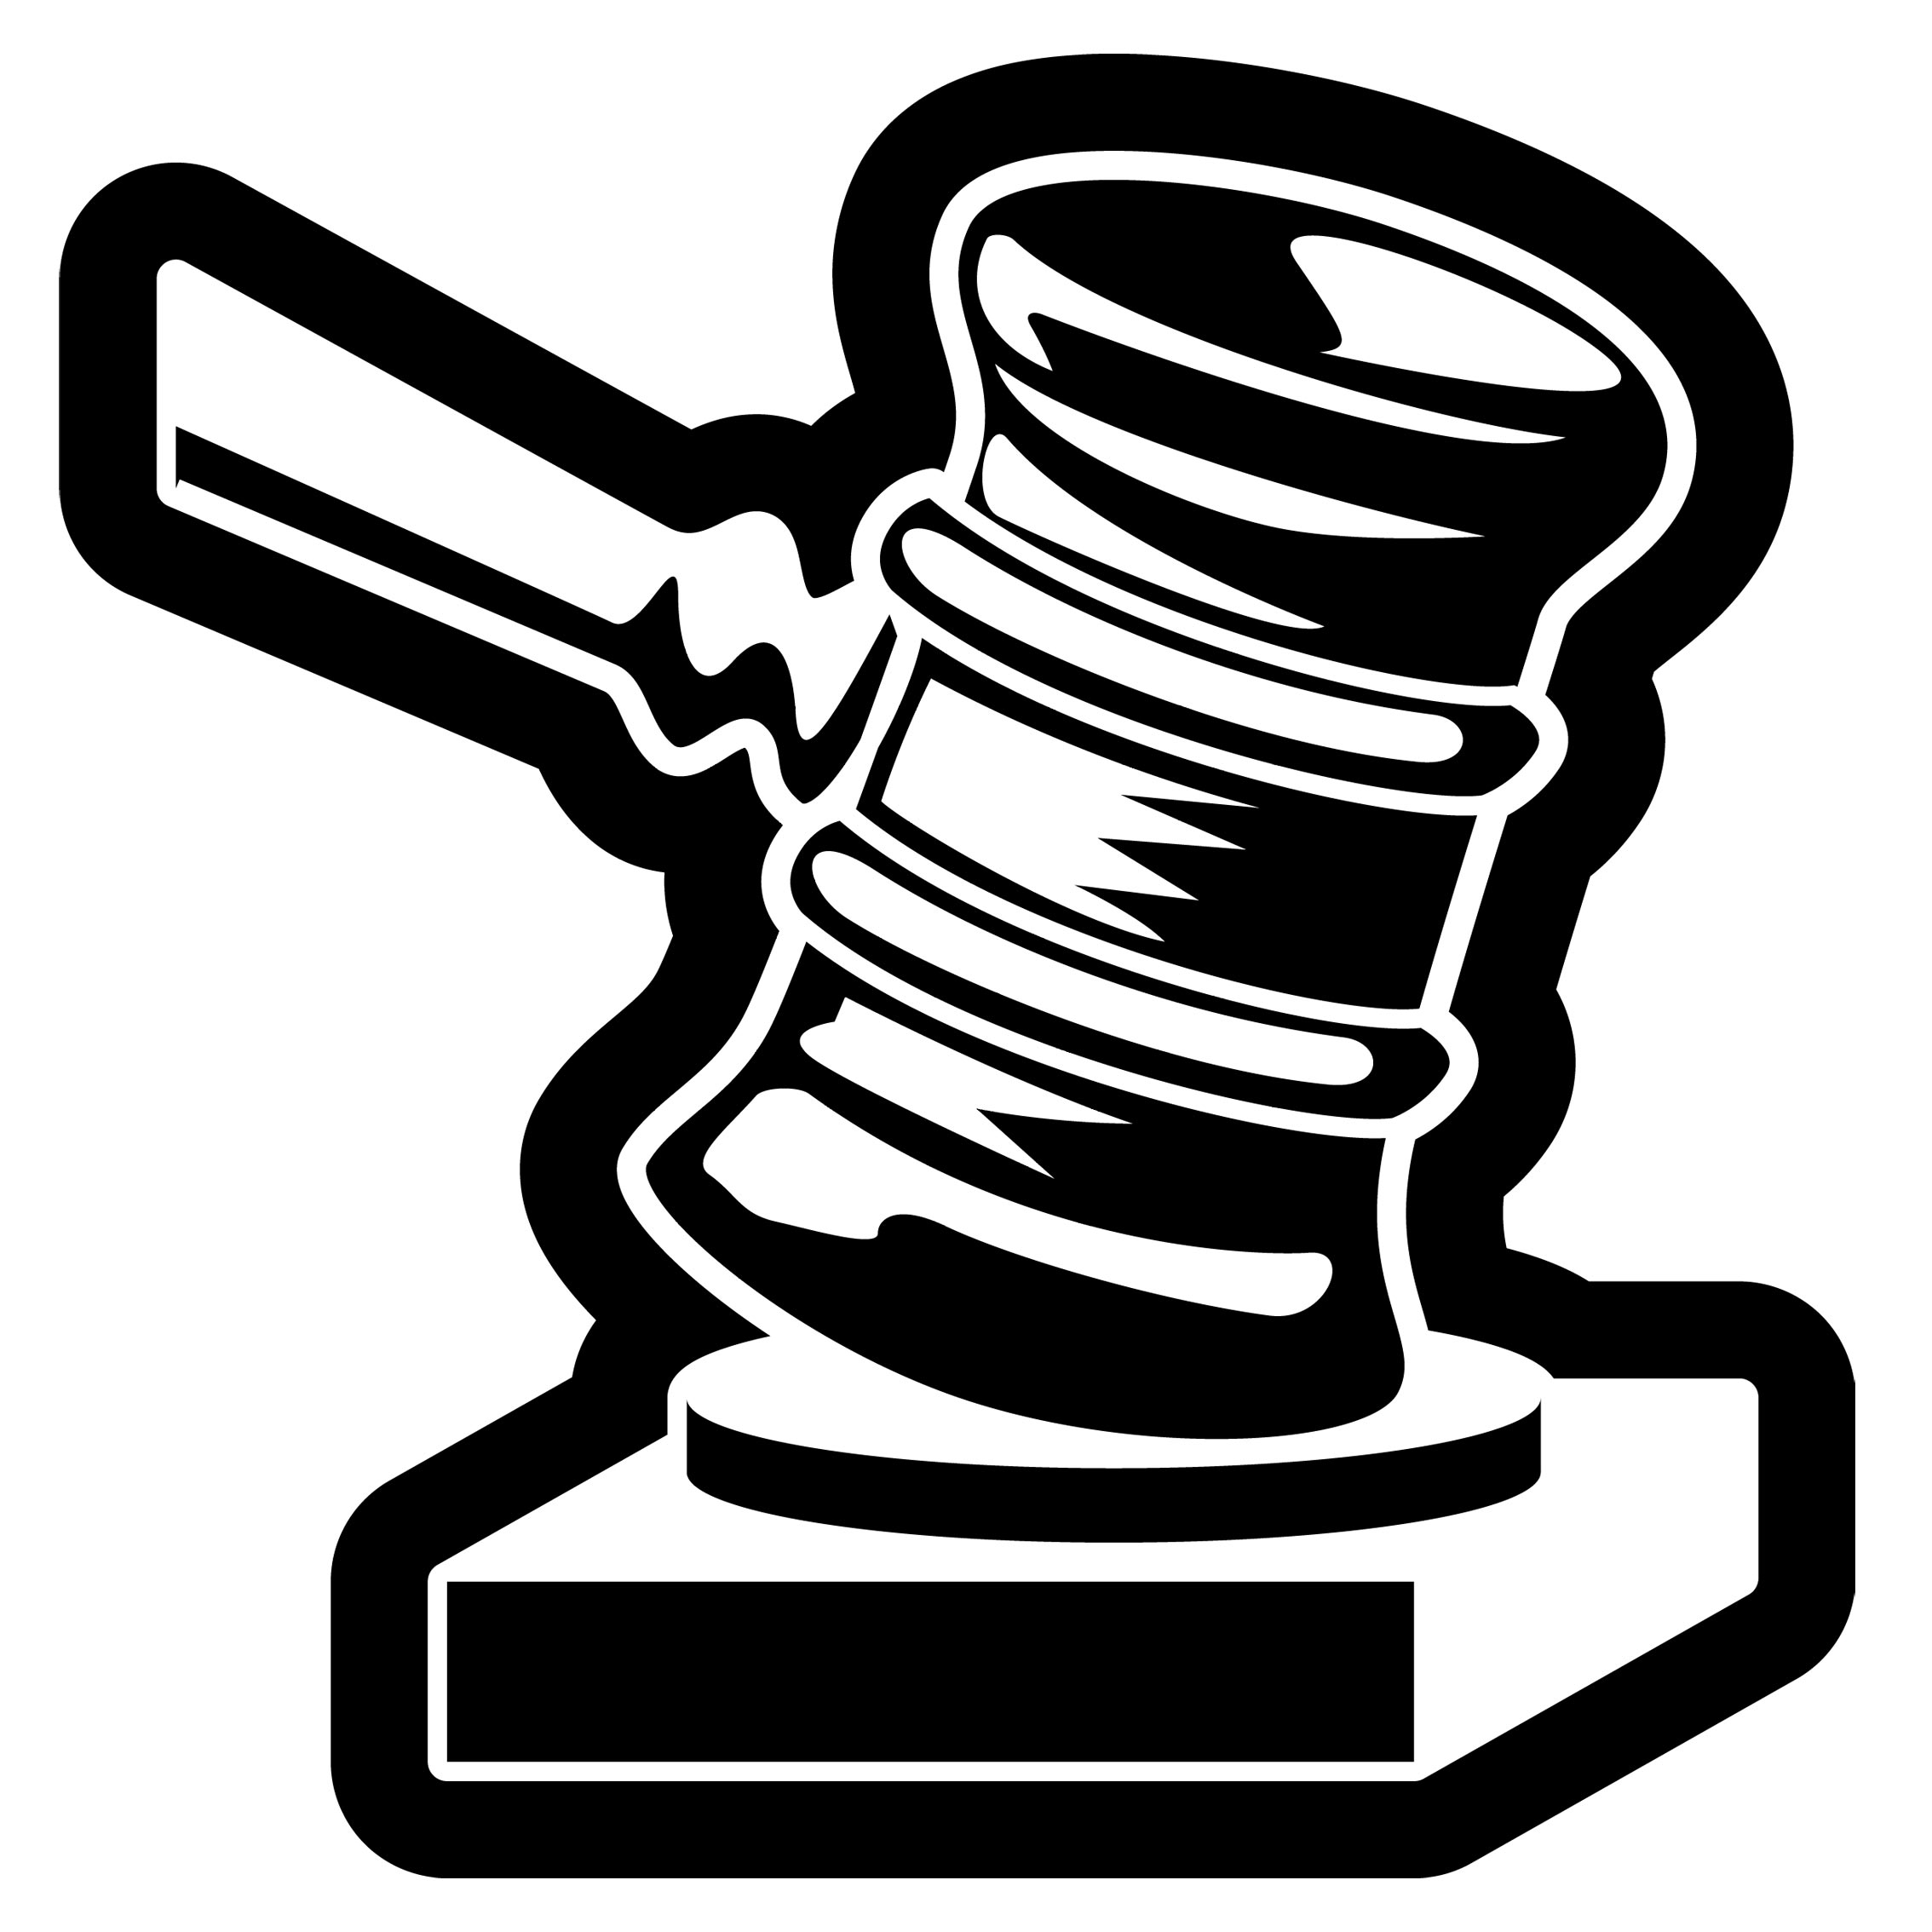 Scales Of Justice Clip Art At